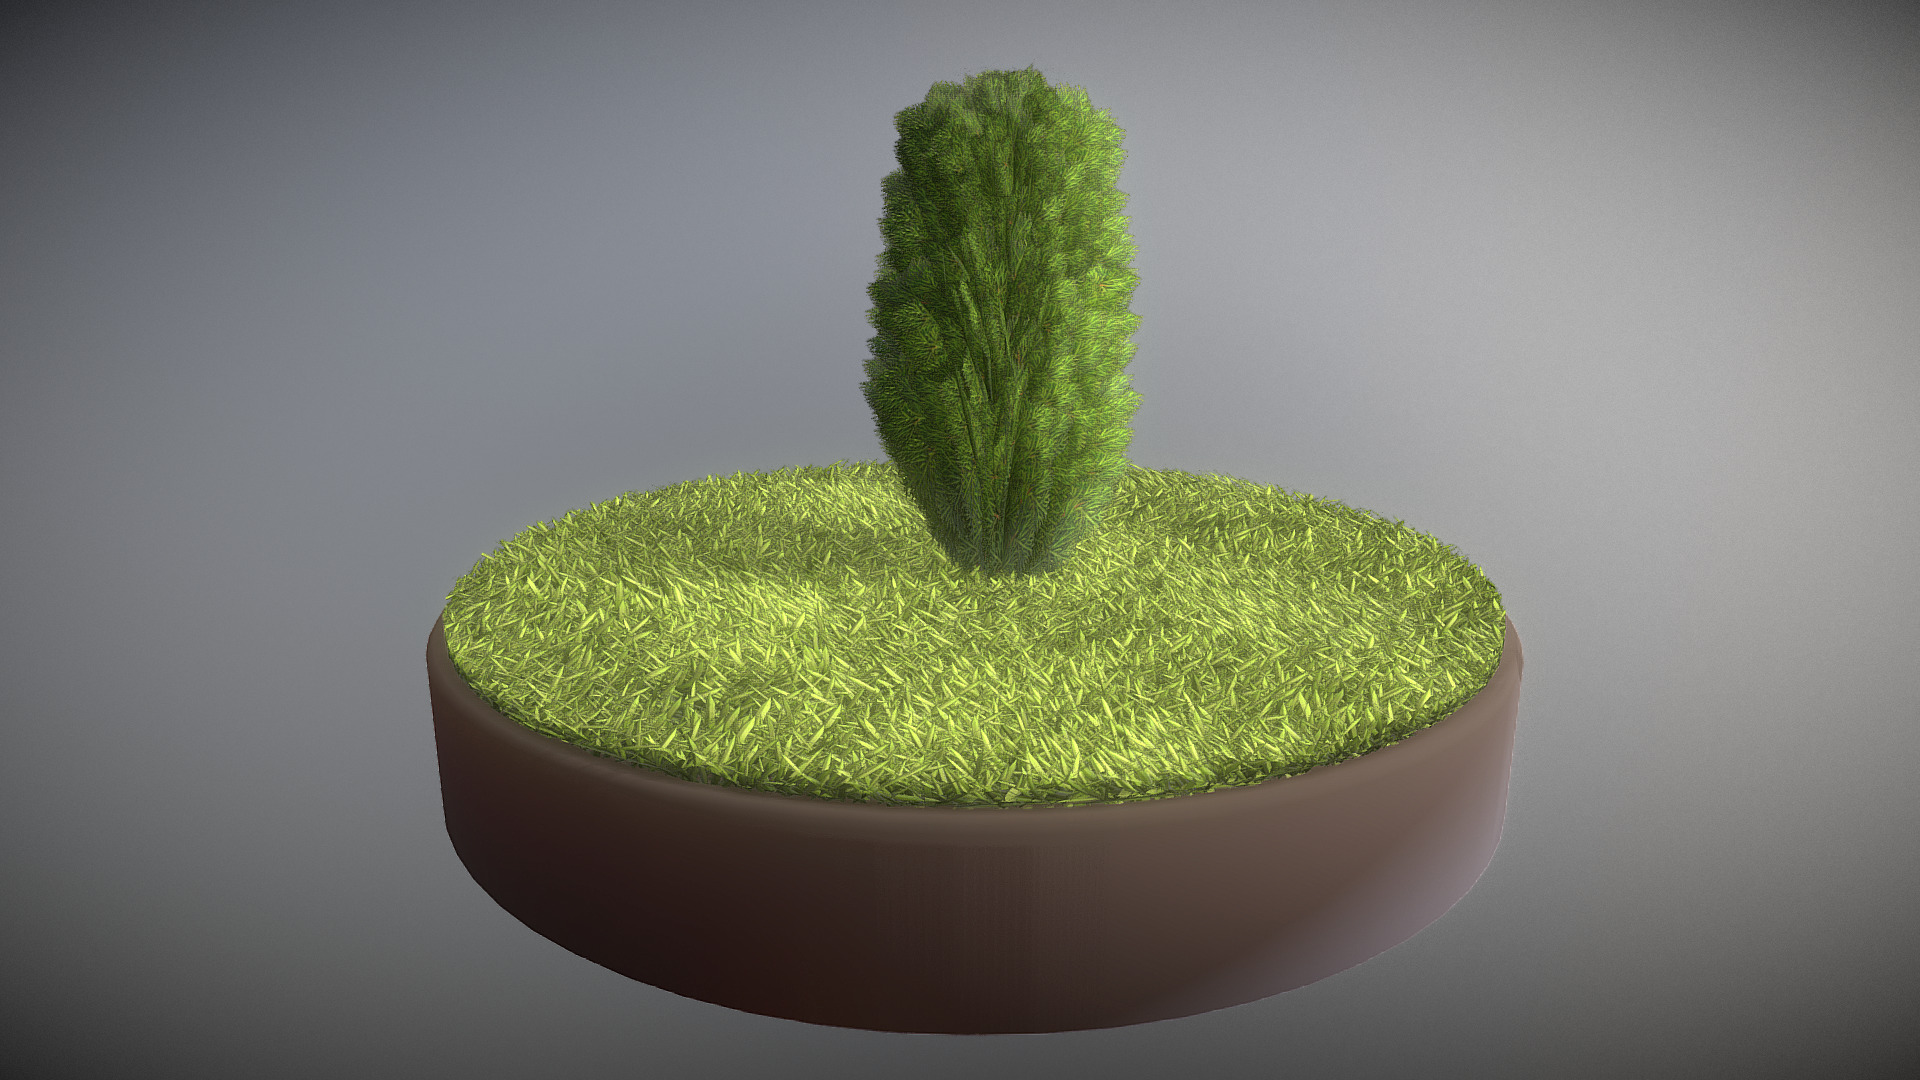 3D model Cypress  – Version 4 – 1 Meter - This is a 3D model of the Cypress  - Version 4 - 1 Meter. The 3D model is about a cactus in a pot.